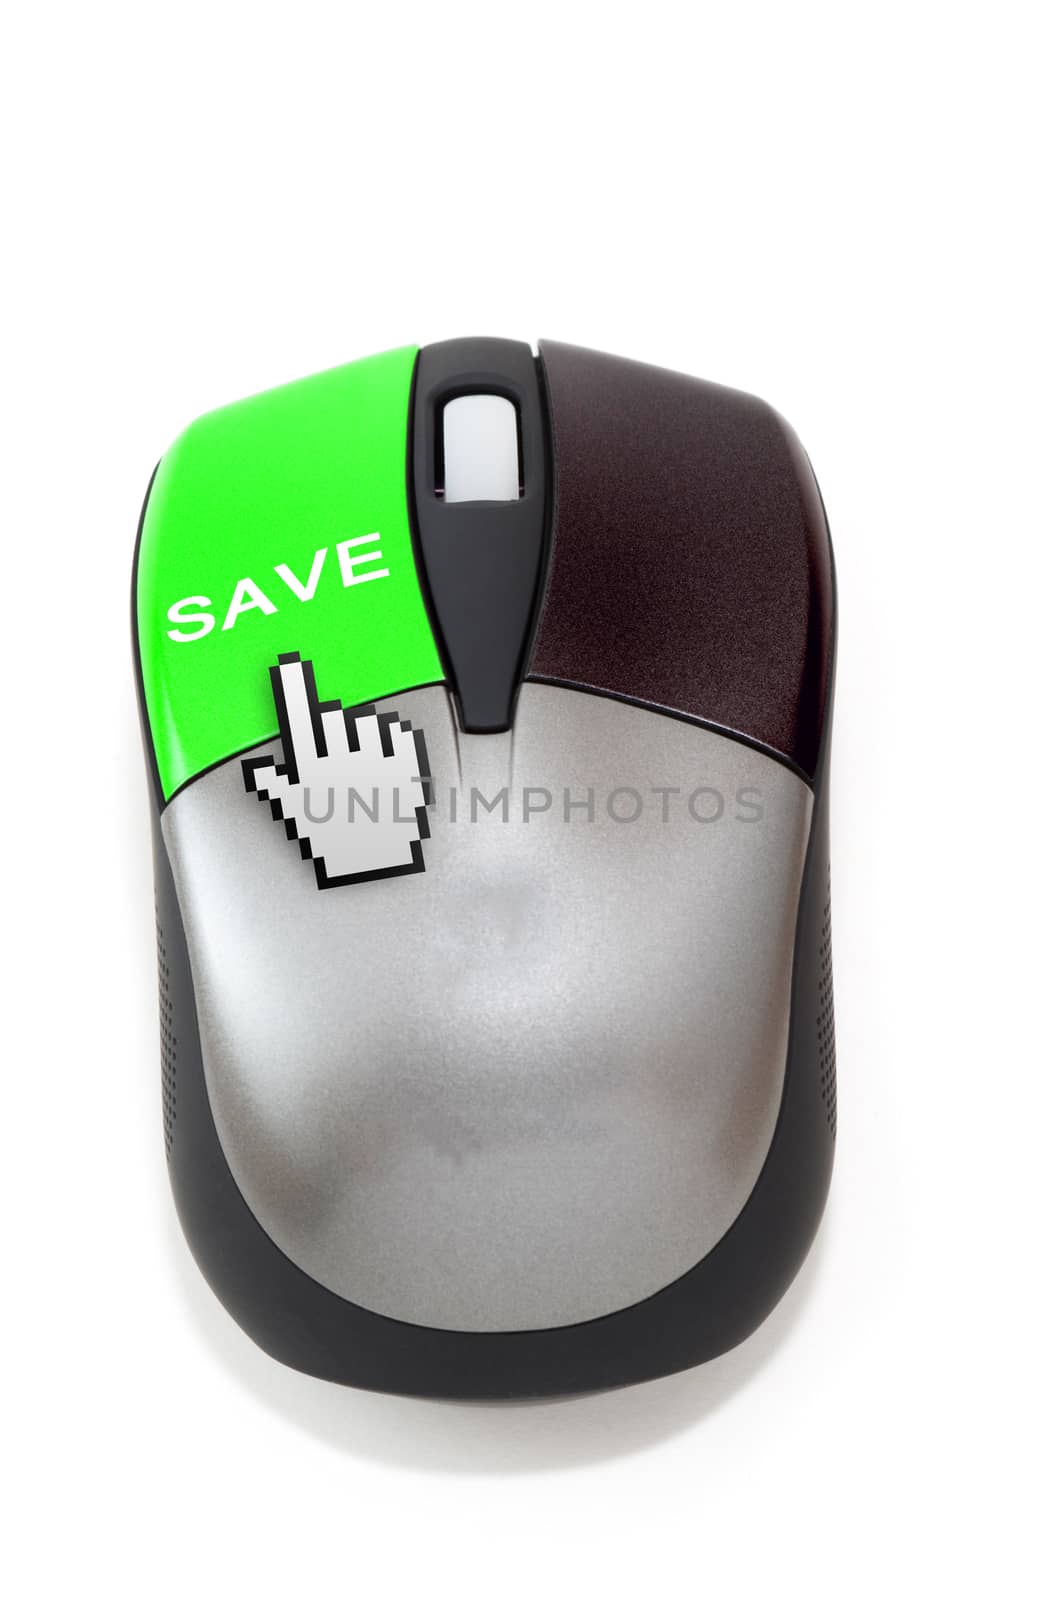 Hand cursor clicking on save button by daoleduc